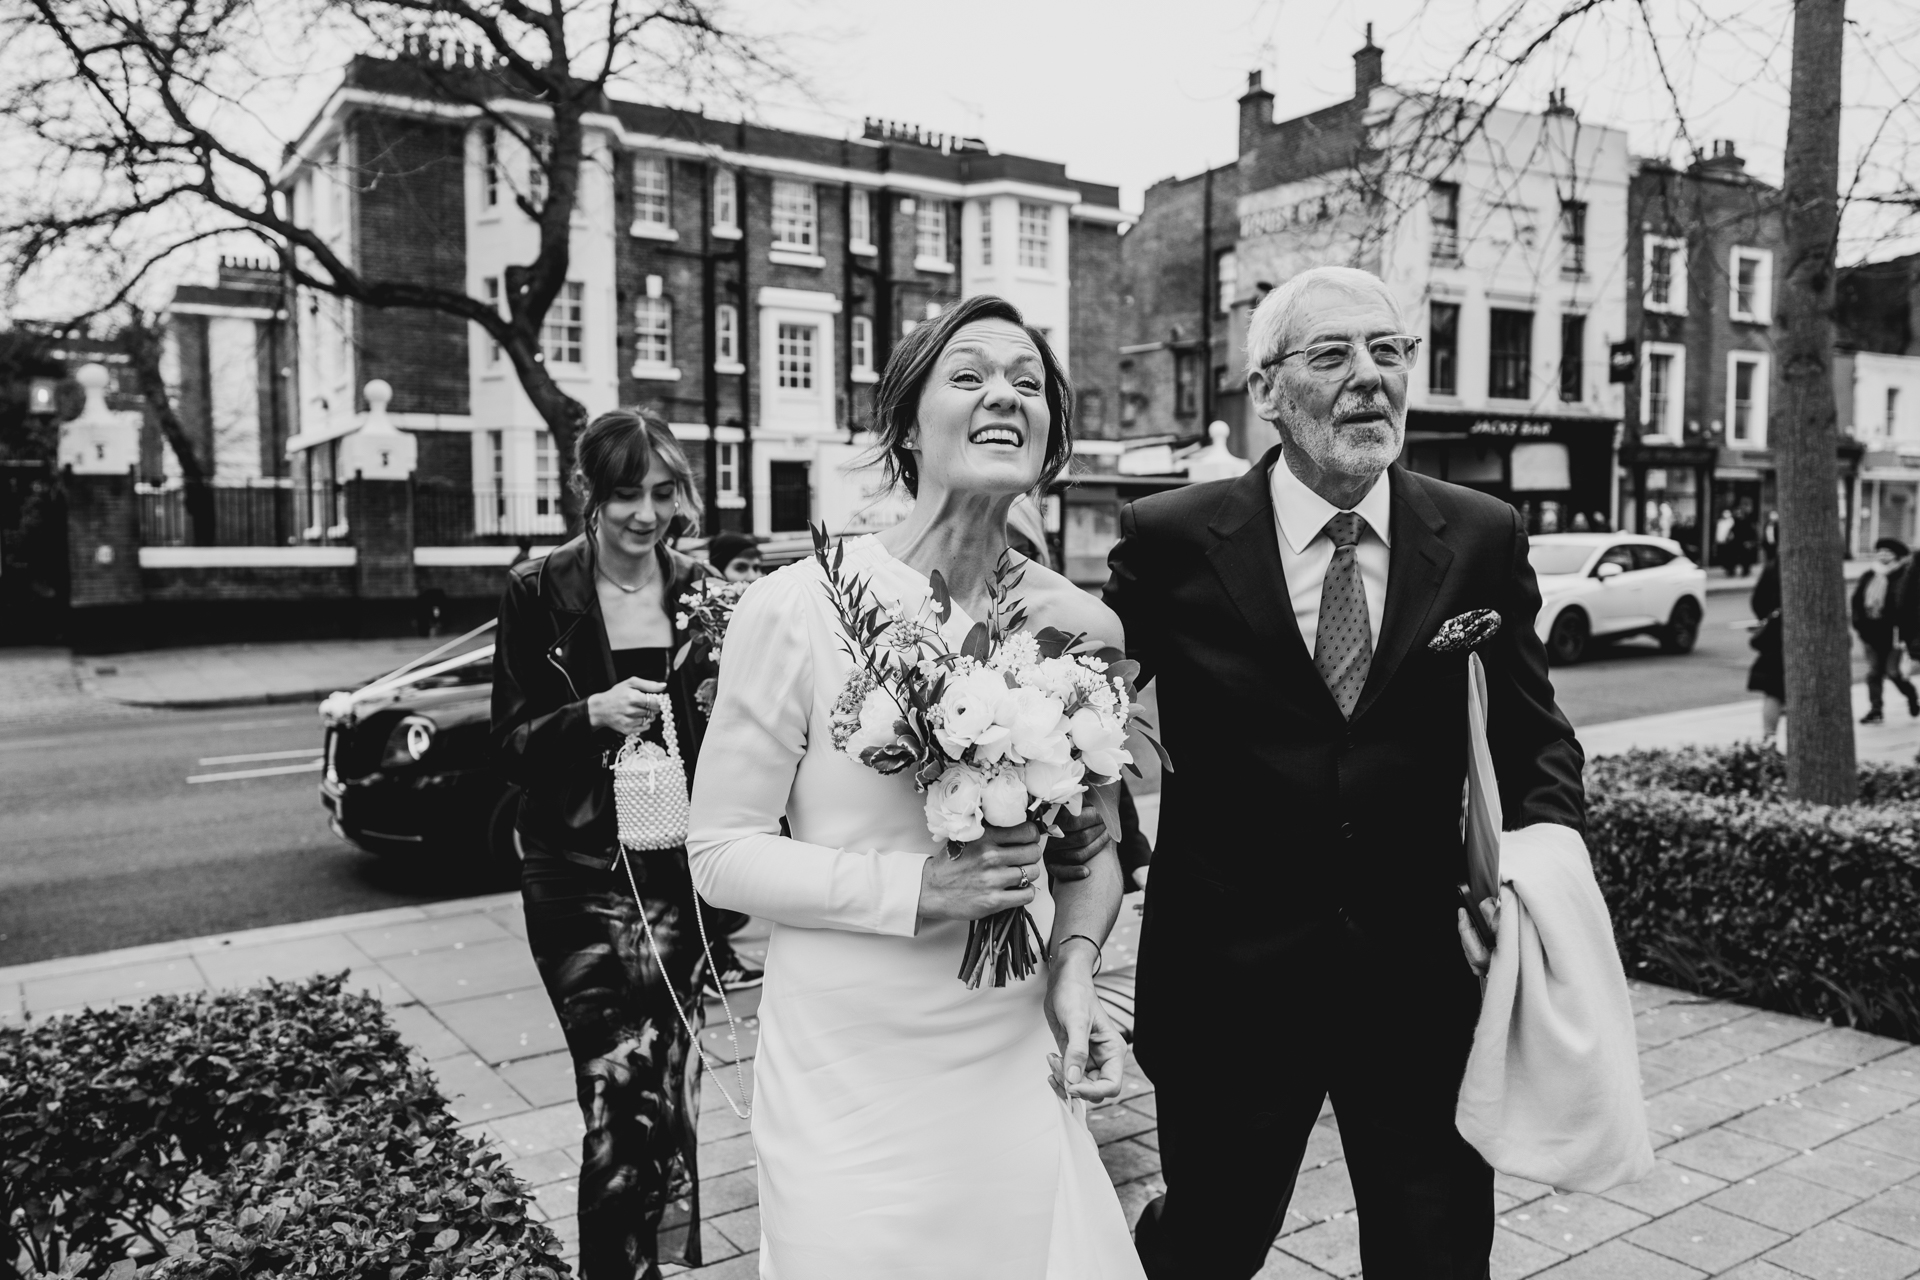 Bride and family arrive at ceremony at Islington Town Hall via Black Cab